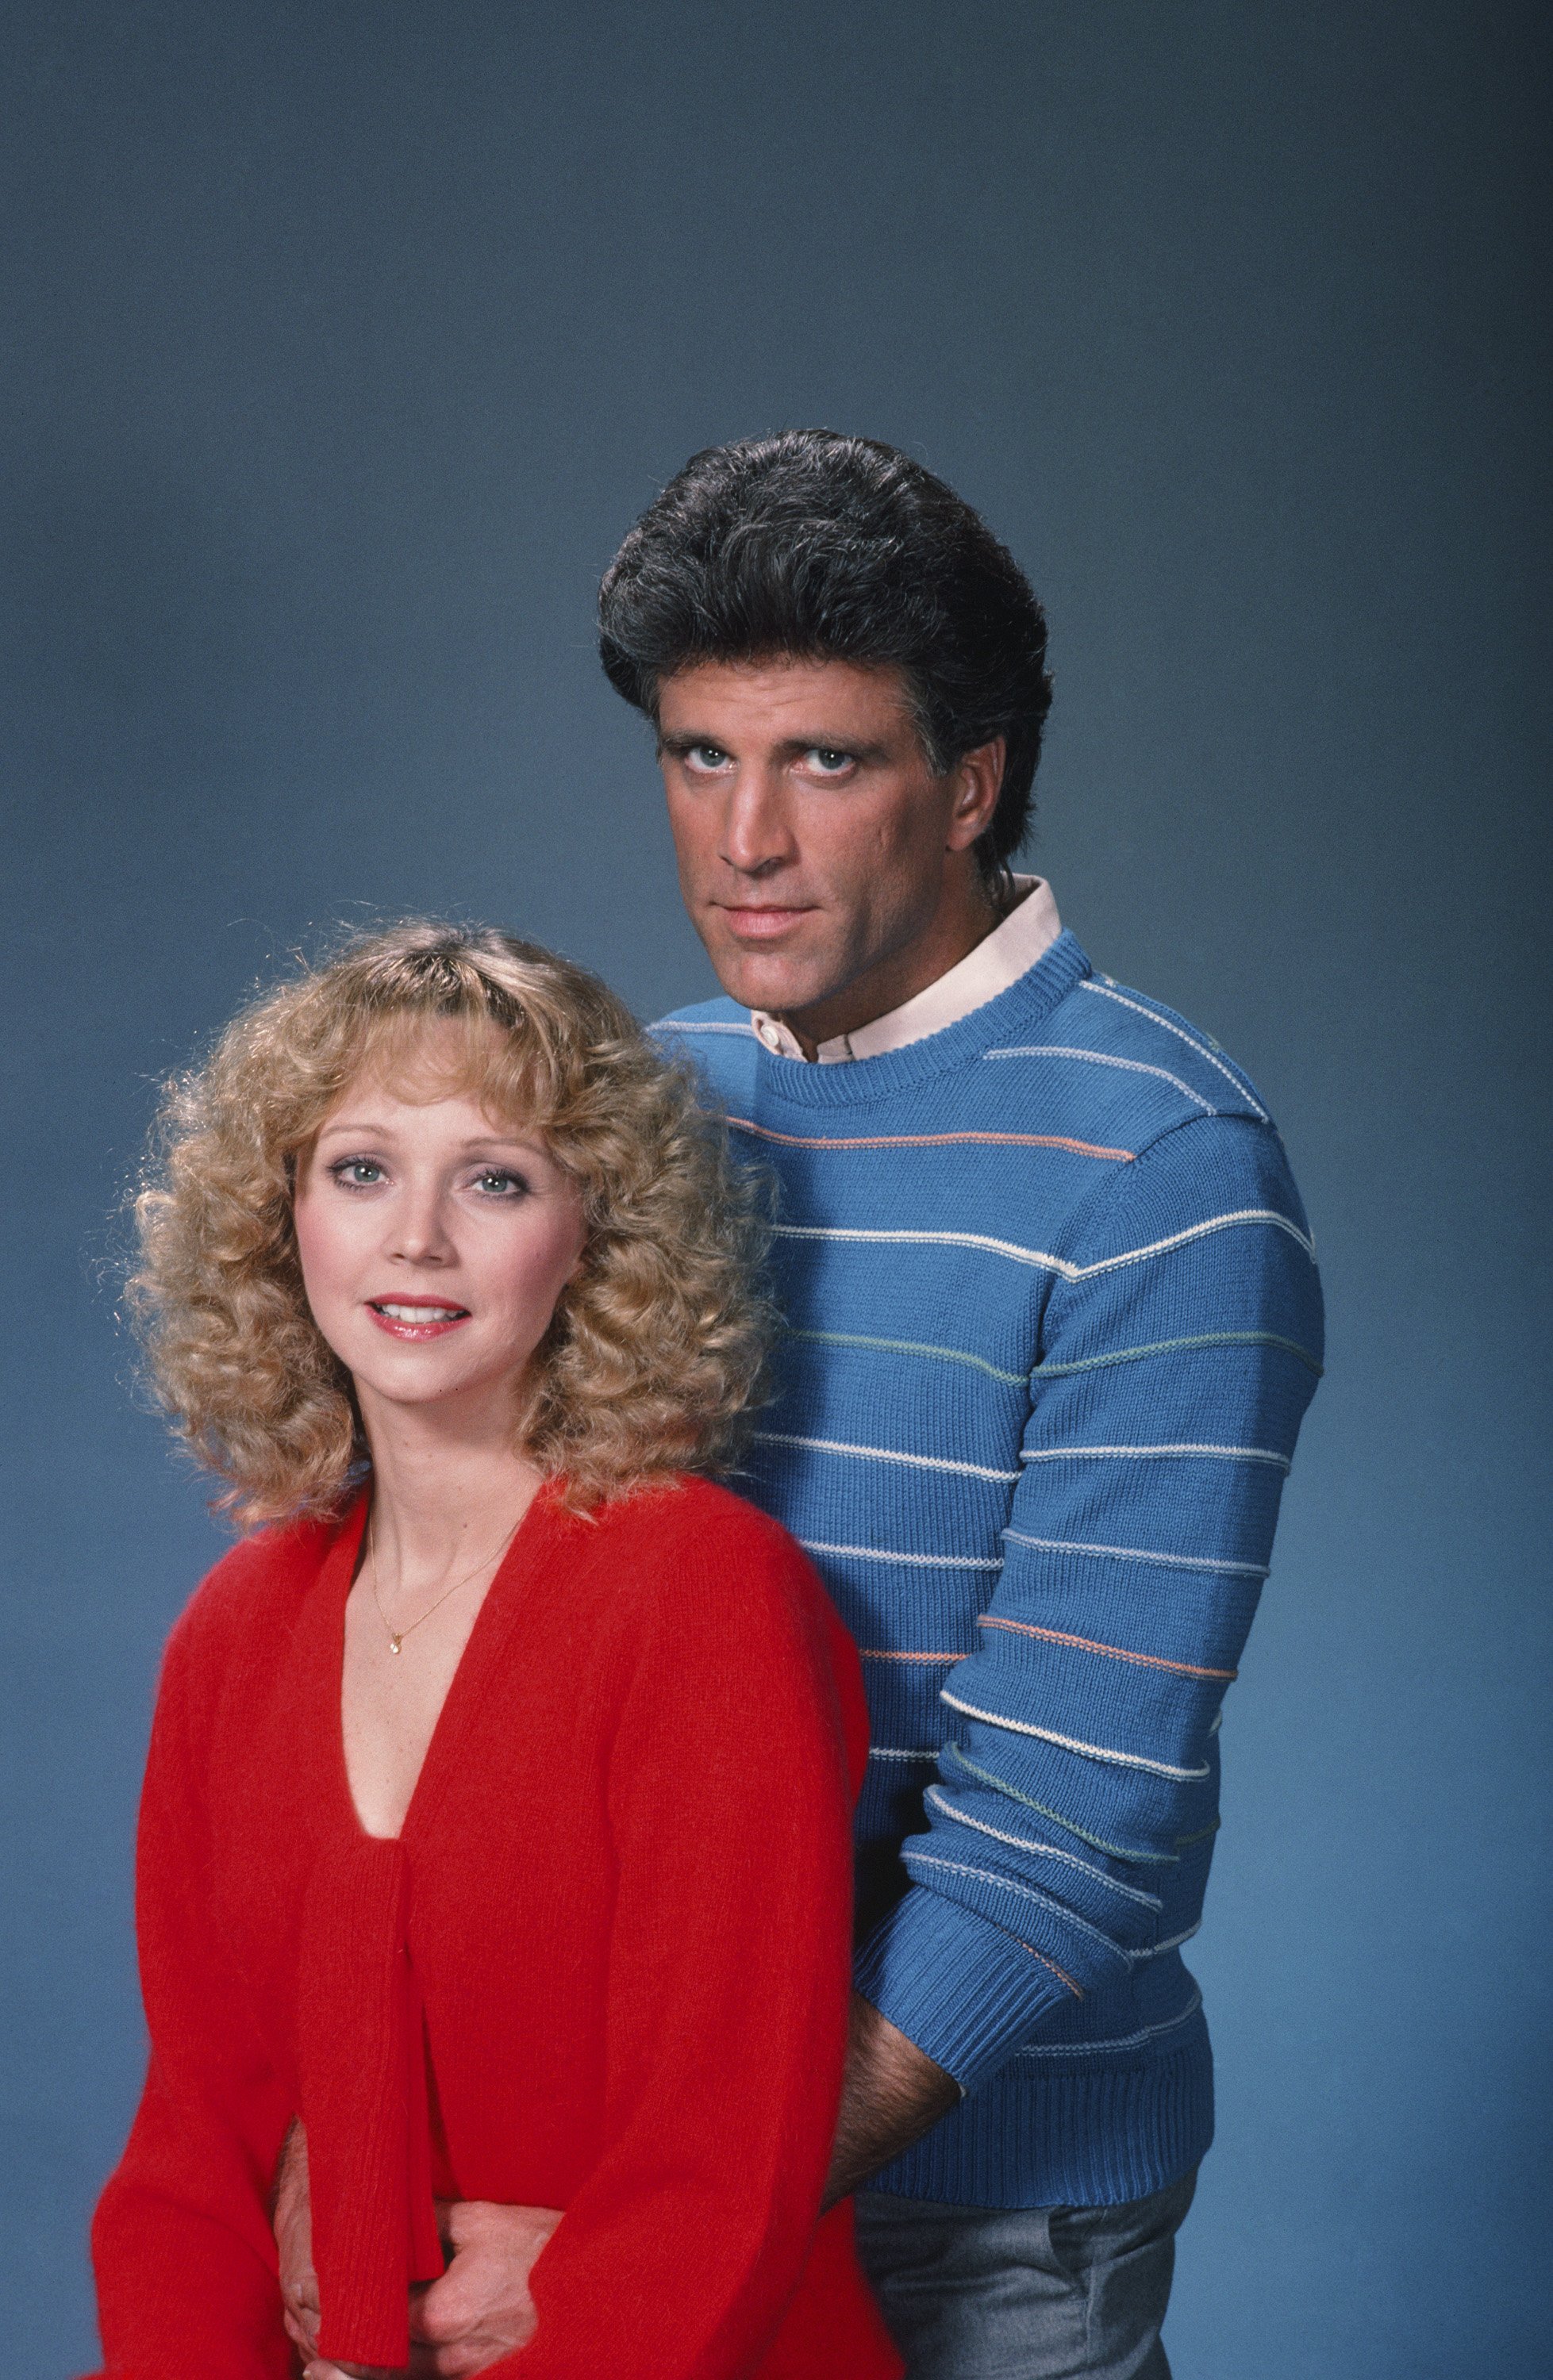 Shelley Long as Diane Chambers, Ted Danson as Sam Malone from "Cheers" | Photo: Getty Images